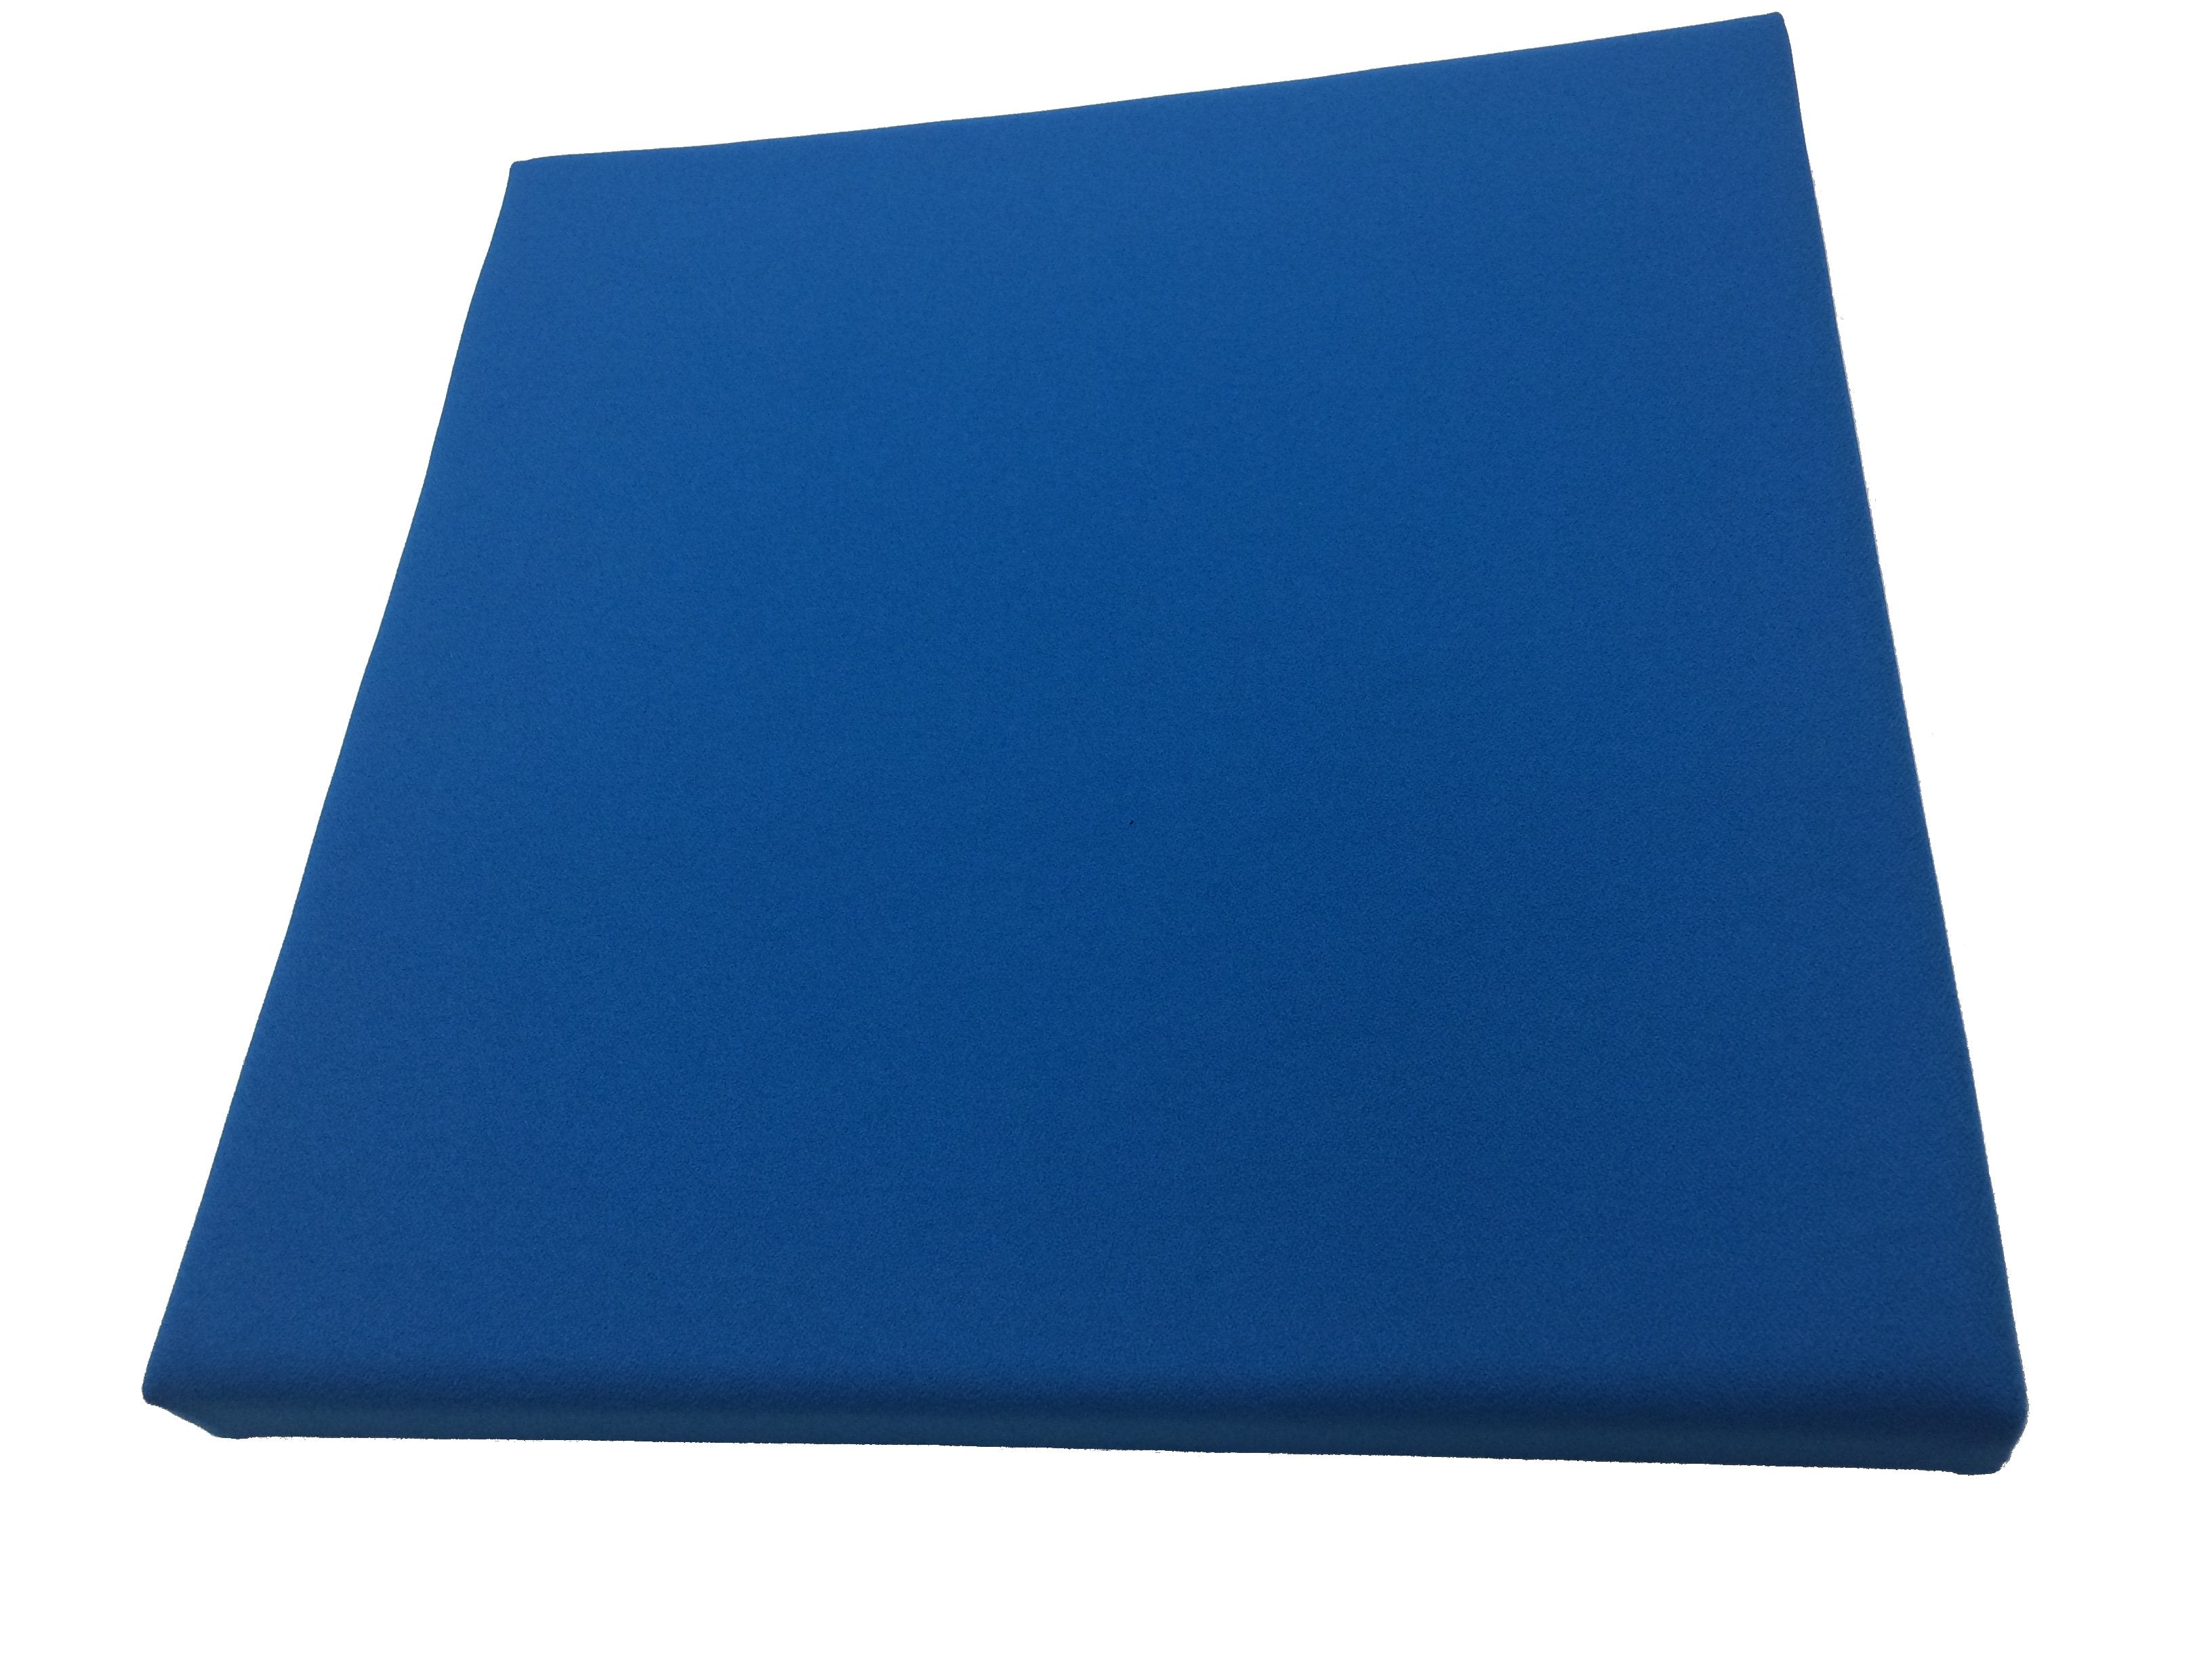 2" SoundControl Ceiling Suspended Acoustic Panel 2ft by 2ft - Advanced Acoustics